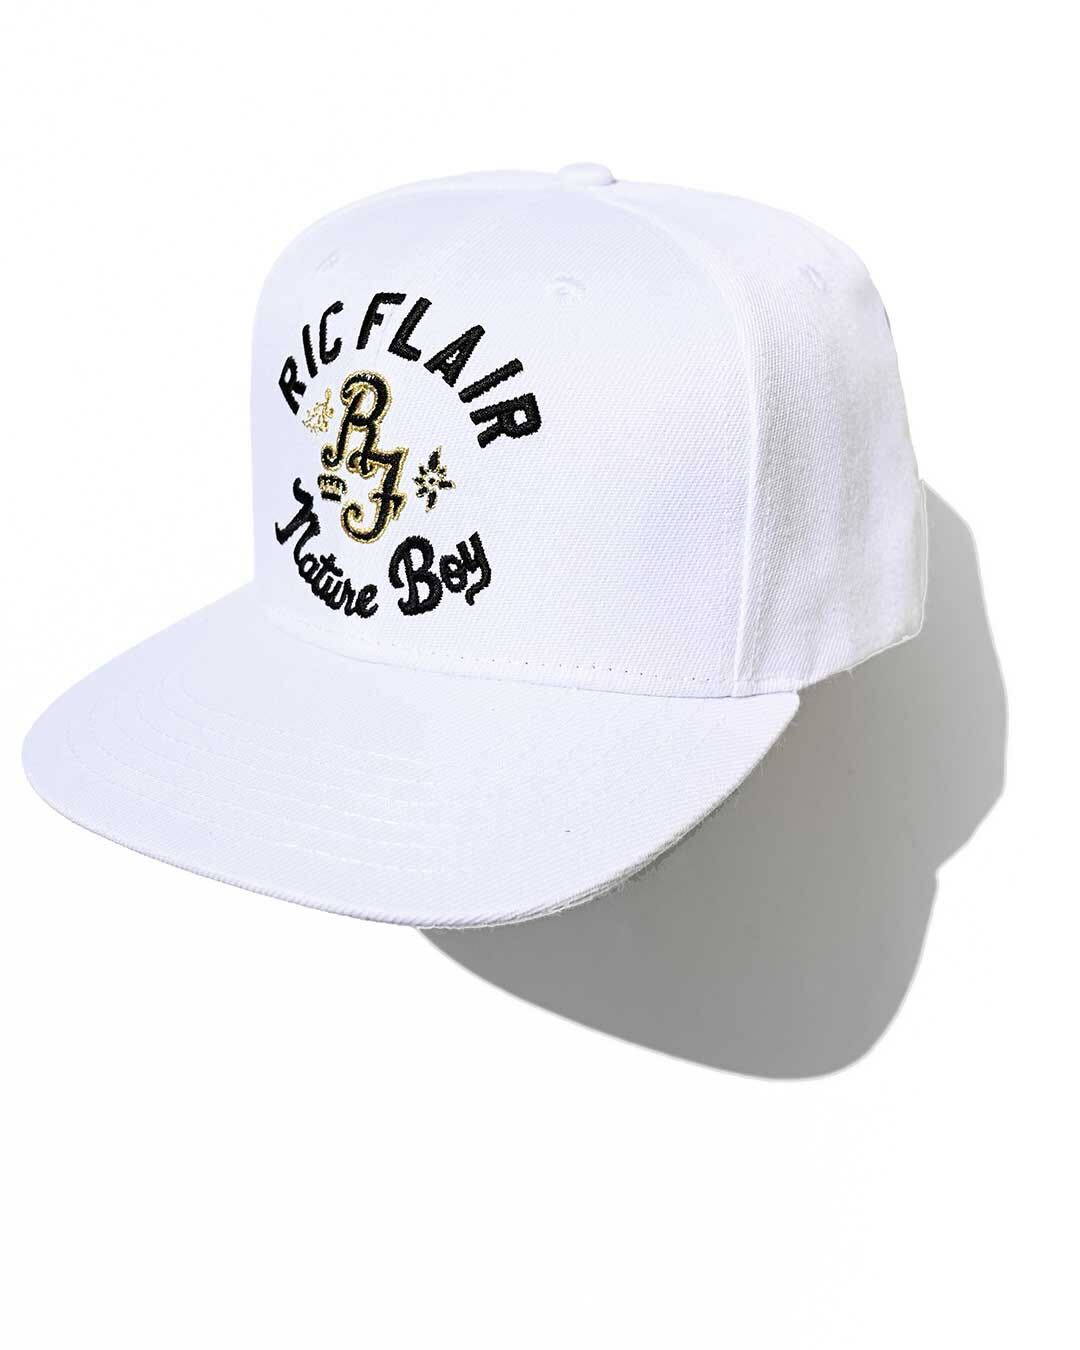 Ric Flair Nature Boy White Snapback Hat - Roots of Fight Canada